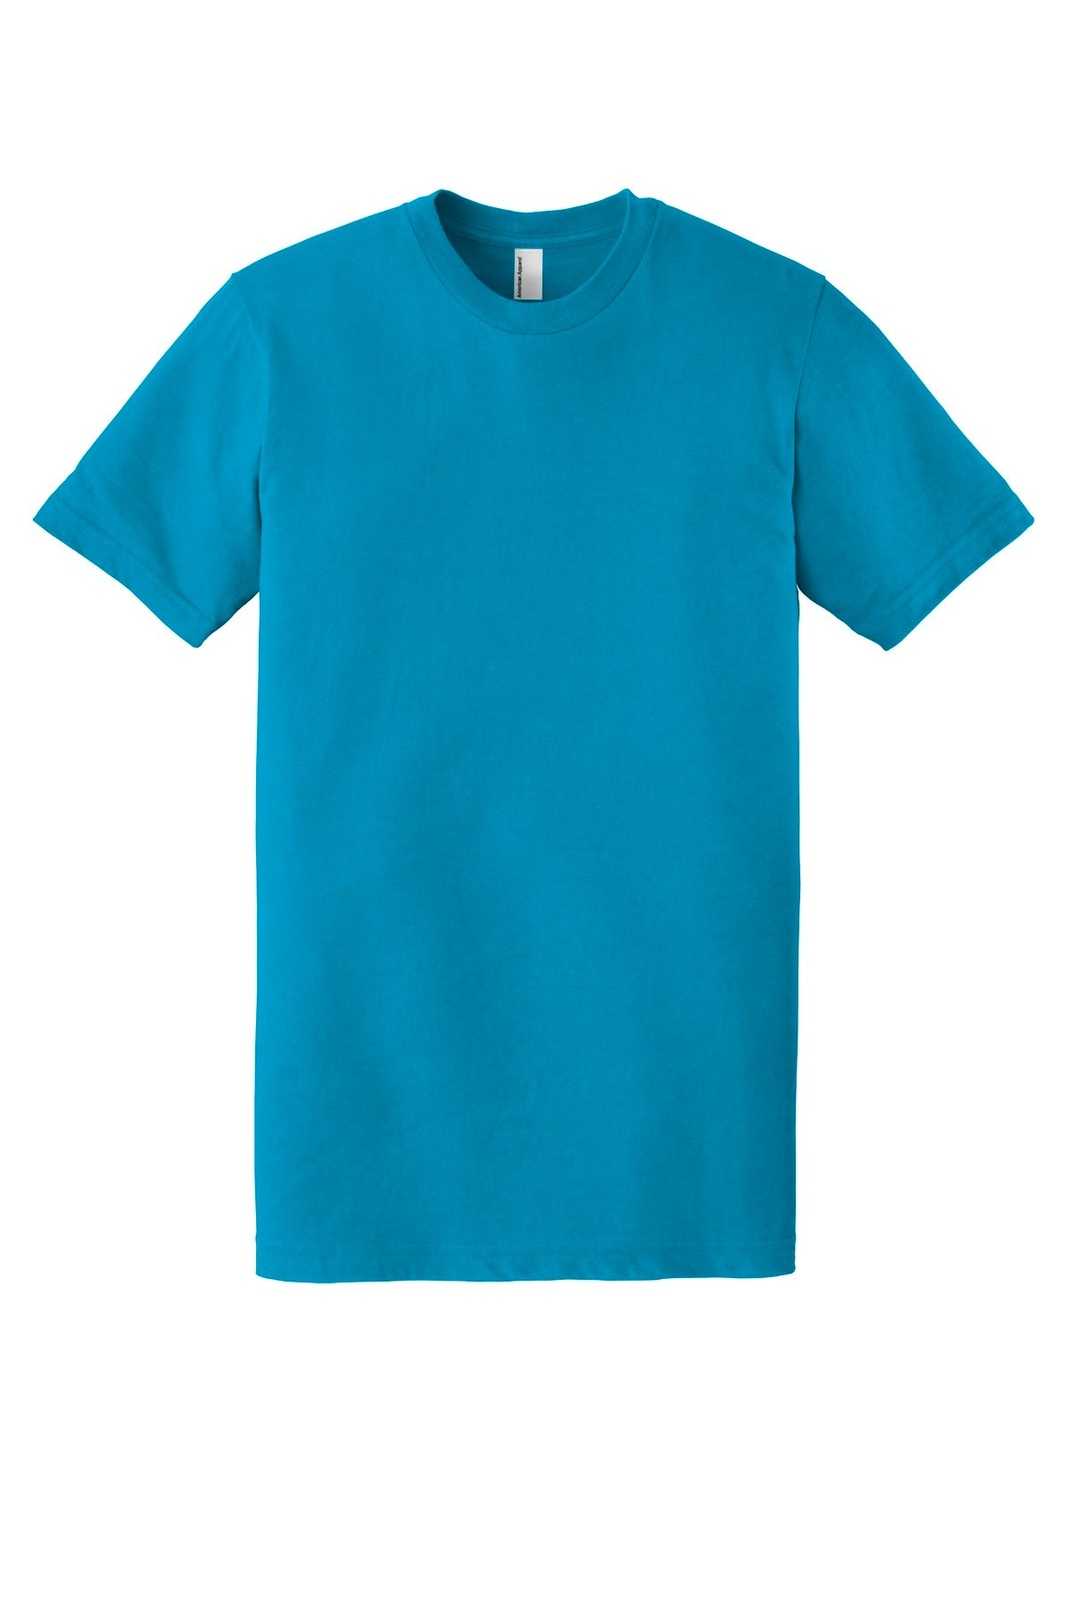 American Apparel 2001W Fine Jersey T-Shirt - Teal - HIT a Double